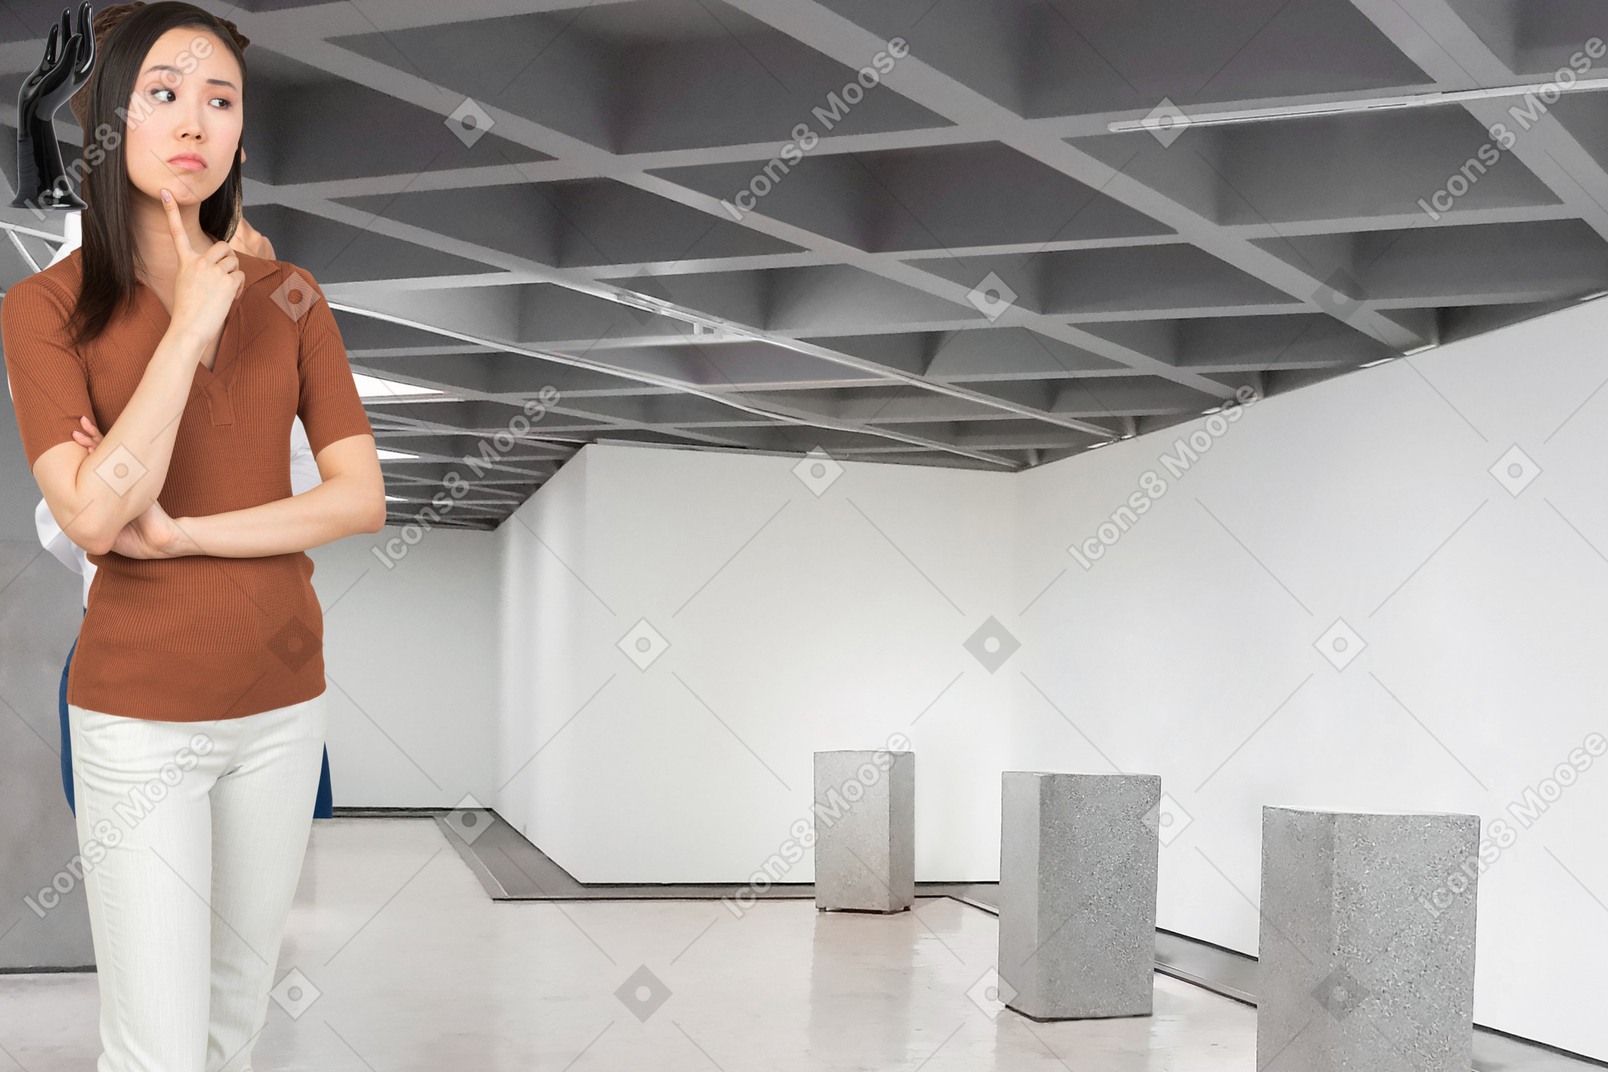 A woman standing in an empty gallery